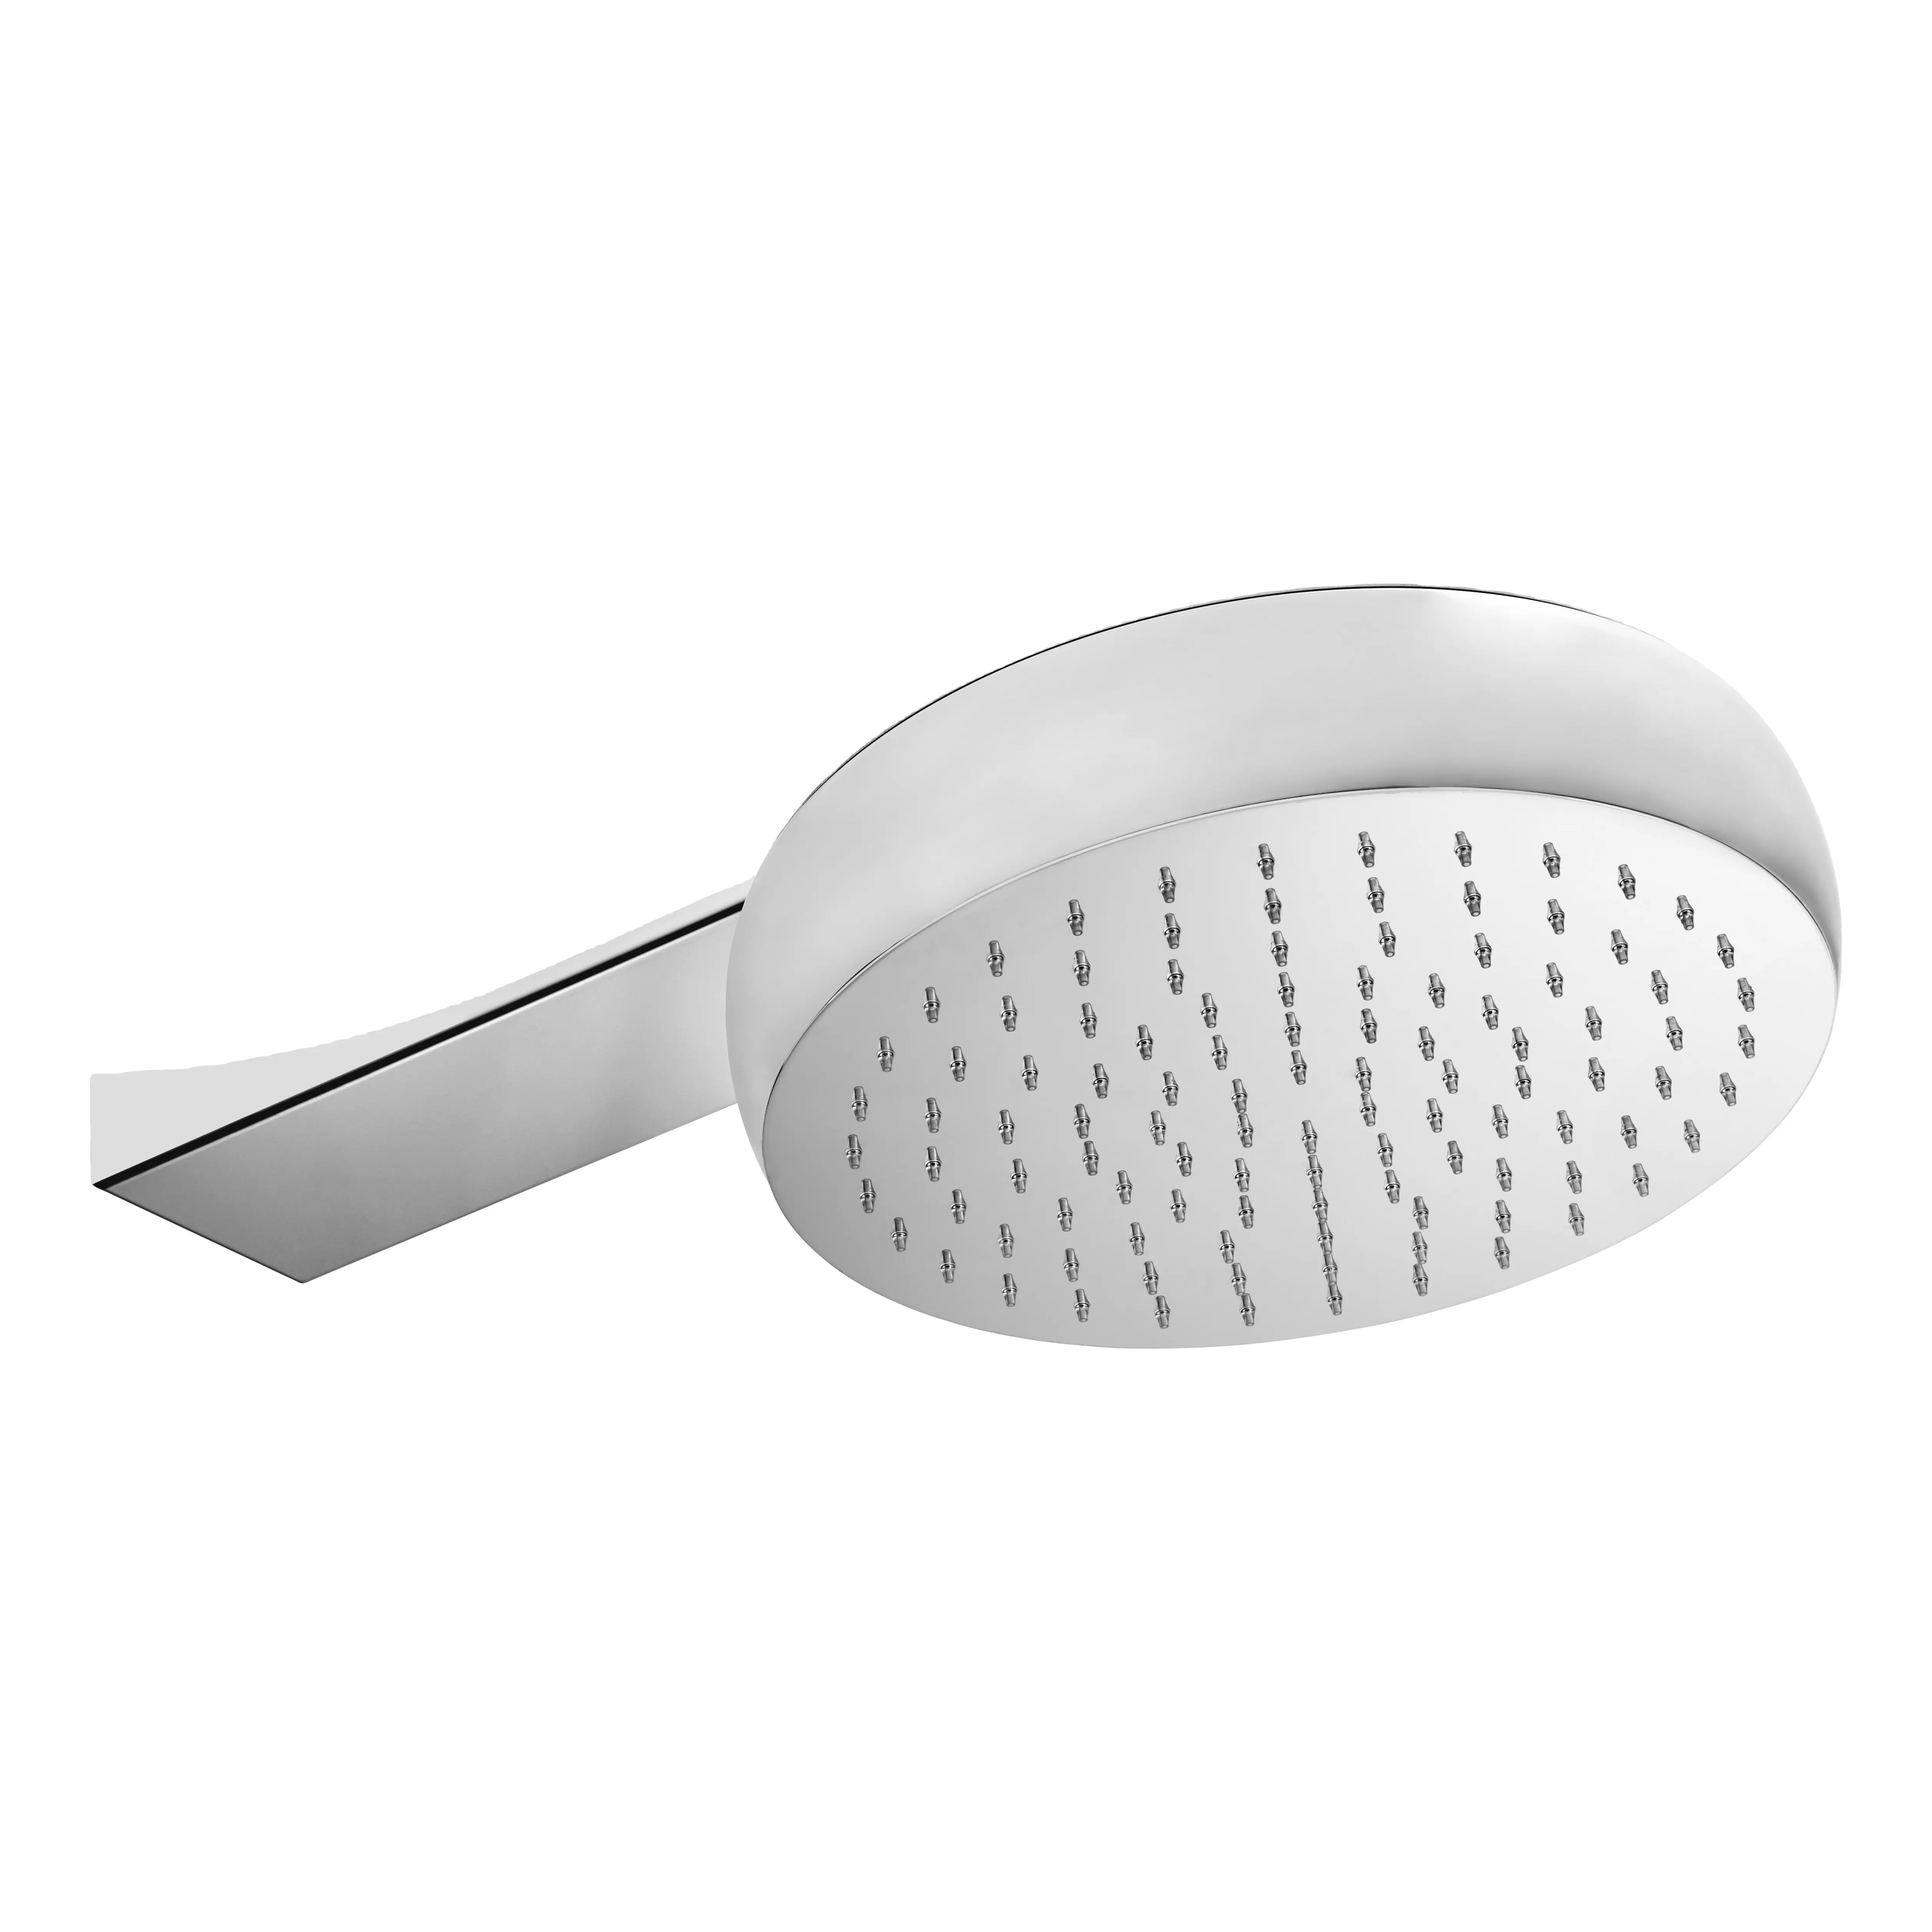 High quality Shower line collection Wall shower head with arm Wellness shower Made in Italy Stainless steel made